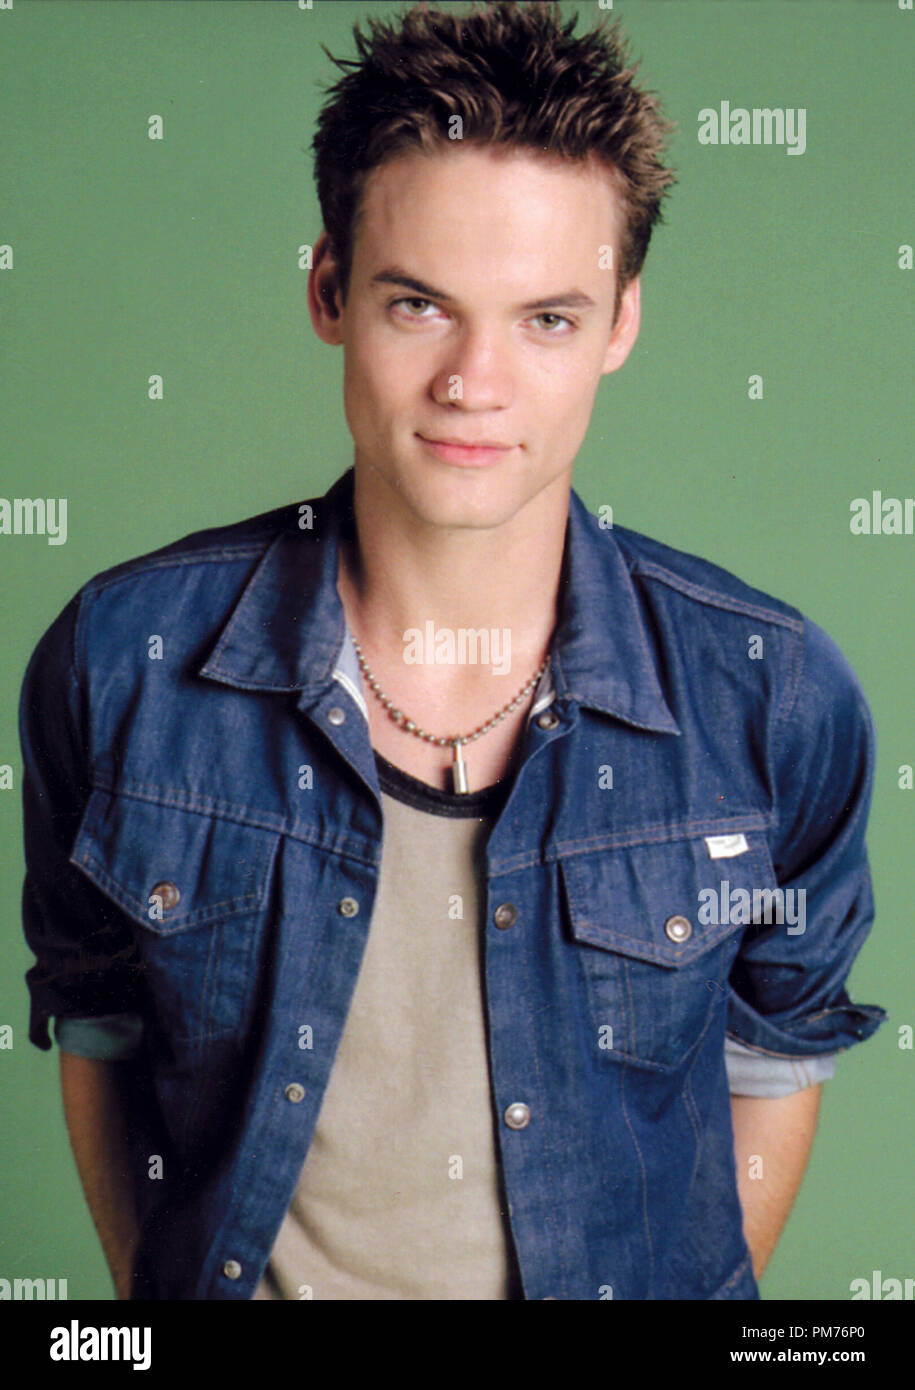 Film Still / Publicity Still from "Once and Again" Shane West 1999   File Reference # 30973506THA  For Editorial Use Only -  All Rights Reserved Stock Photo